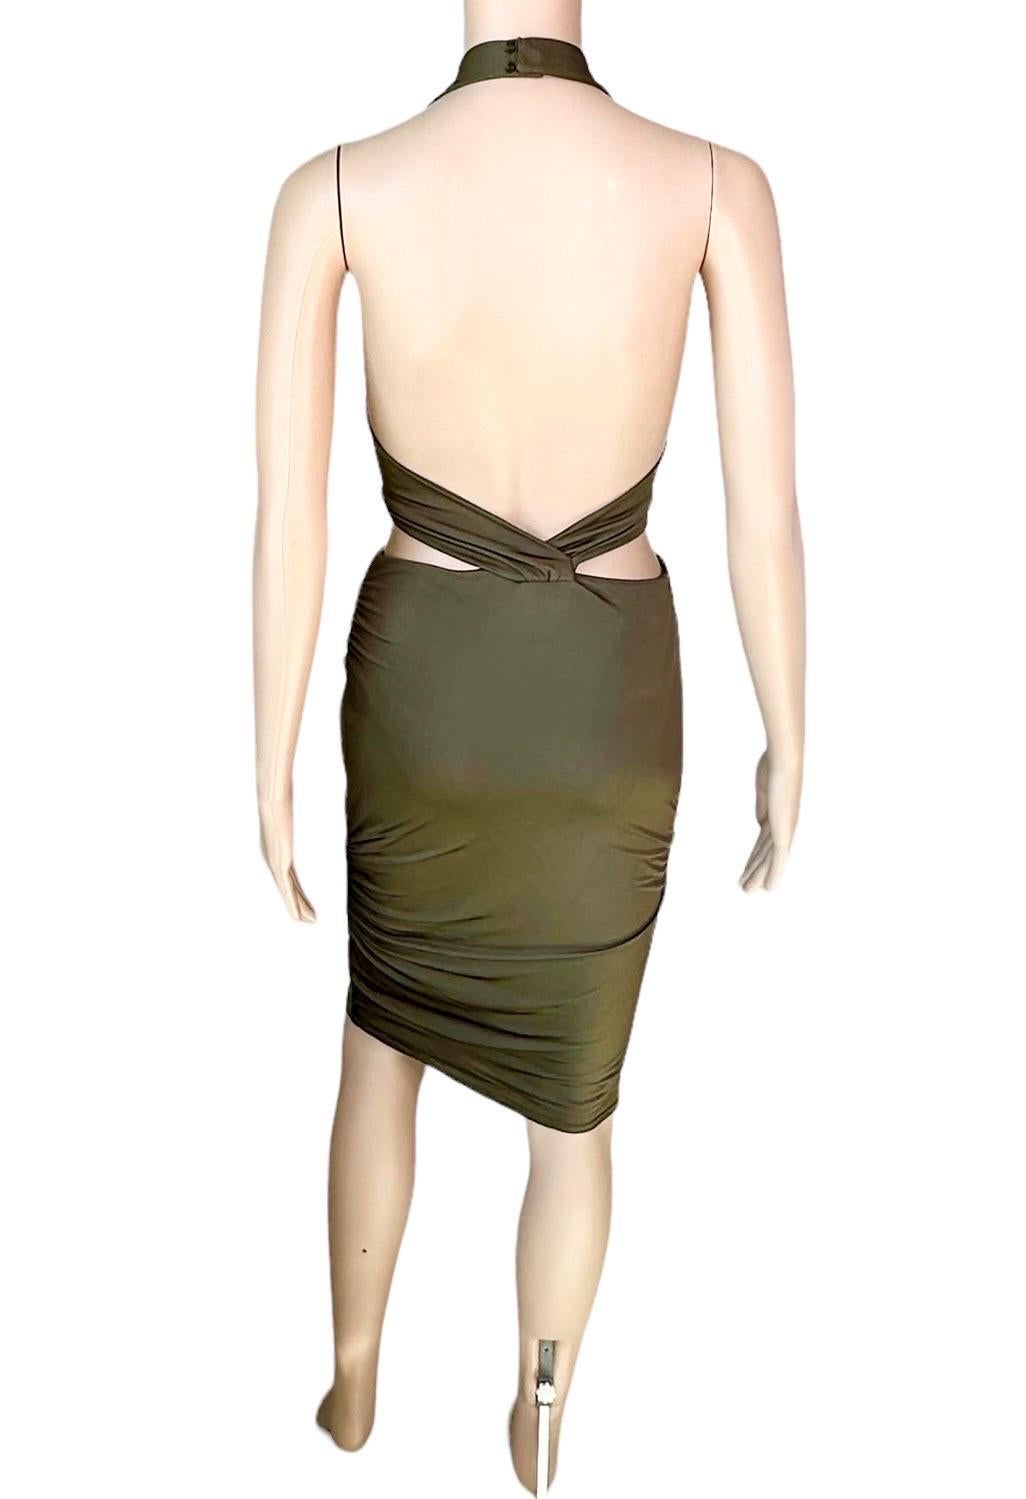 Gucci S/S 2005 Plunging Cutout Backless Bodycon Mini Dress In Good Condition For Sale In Naples, FL